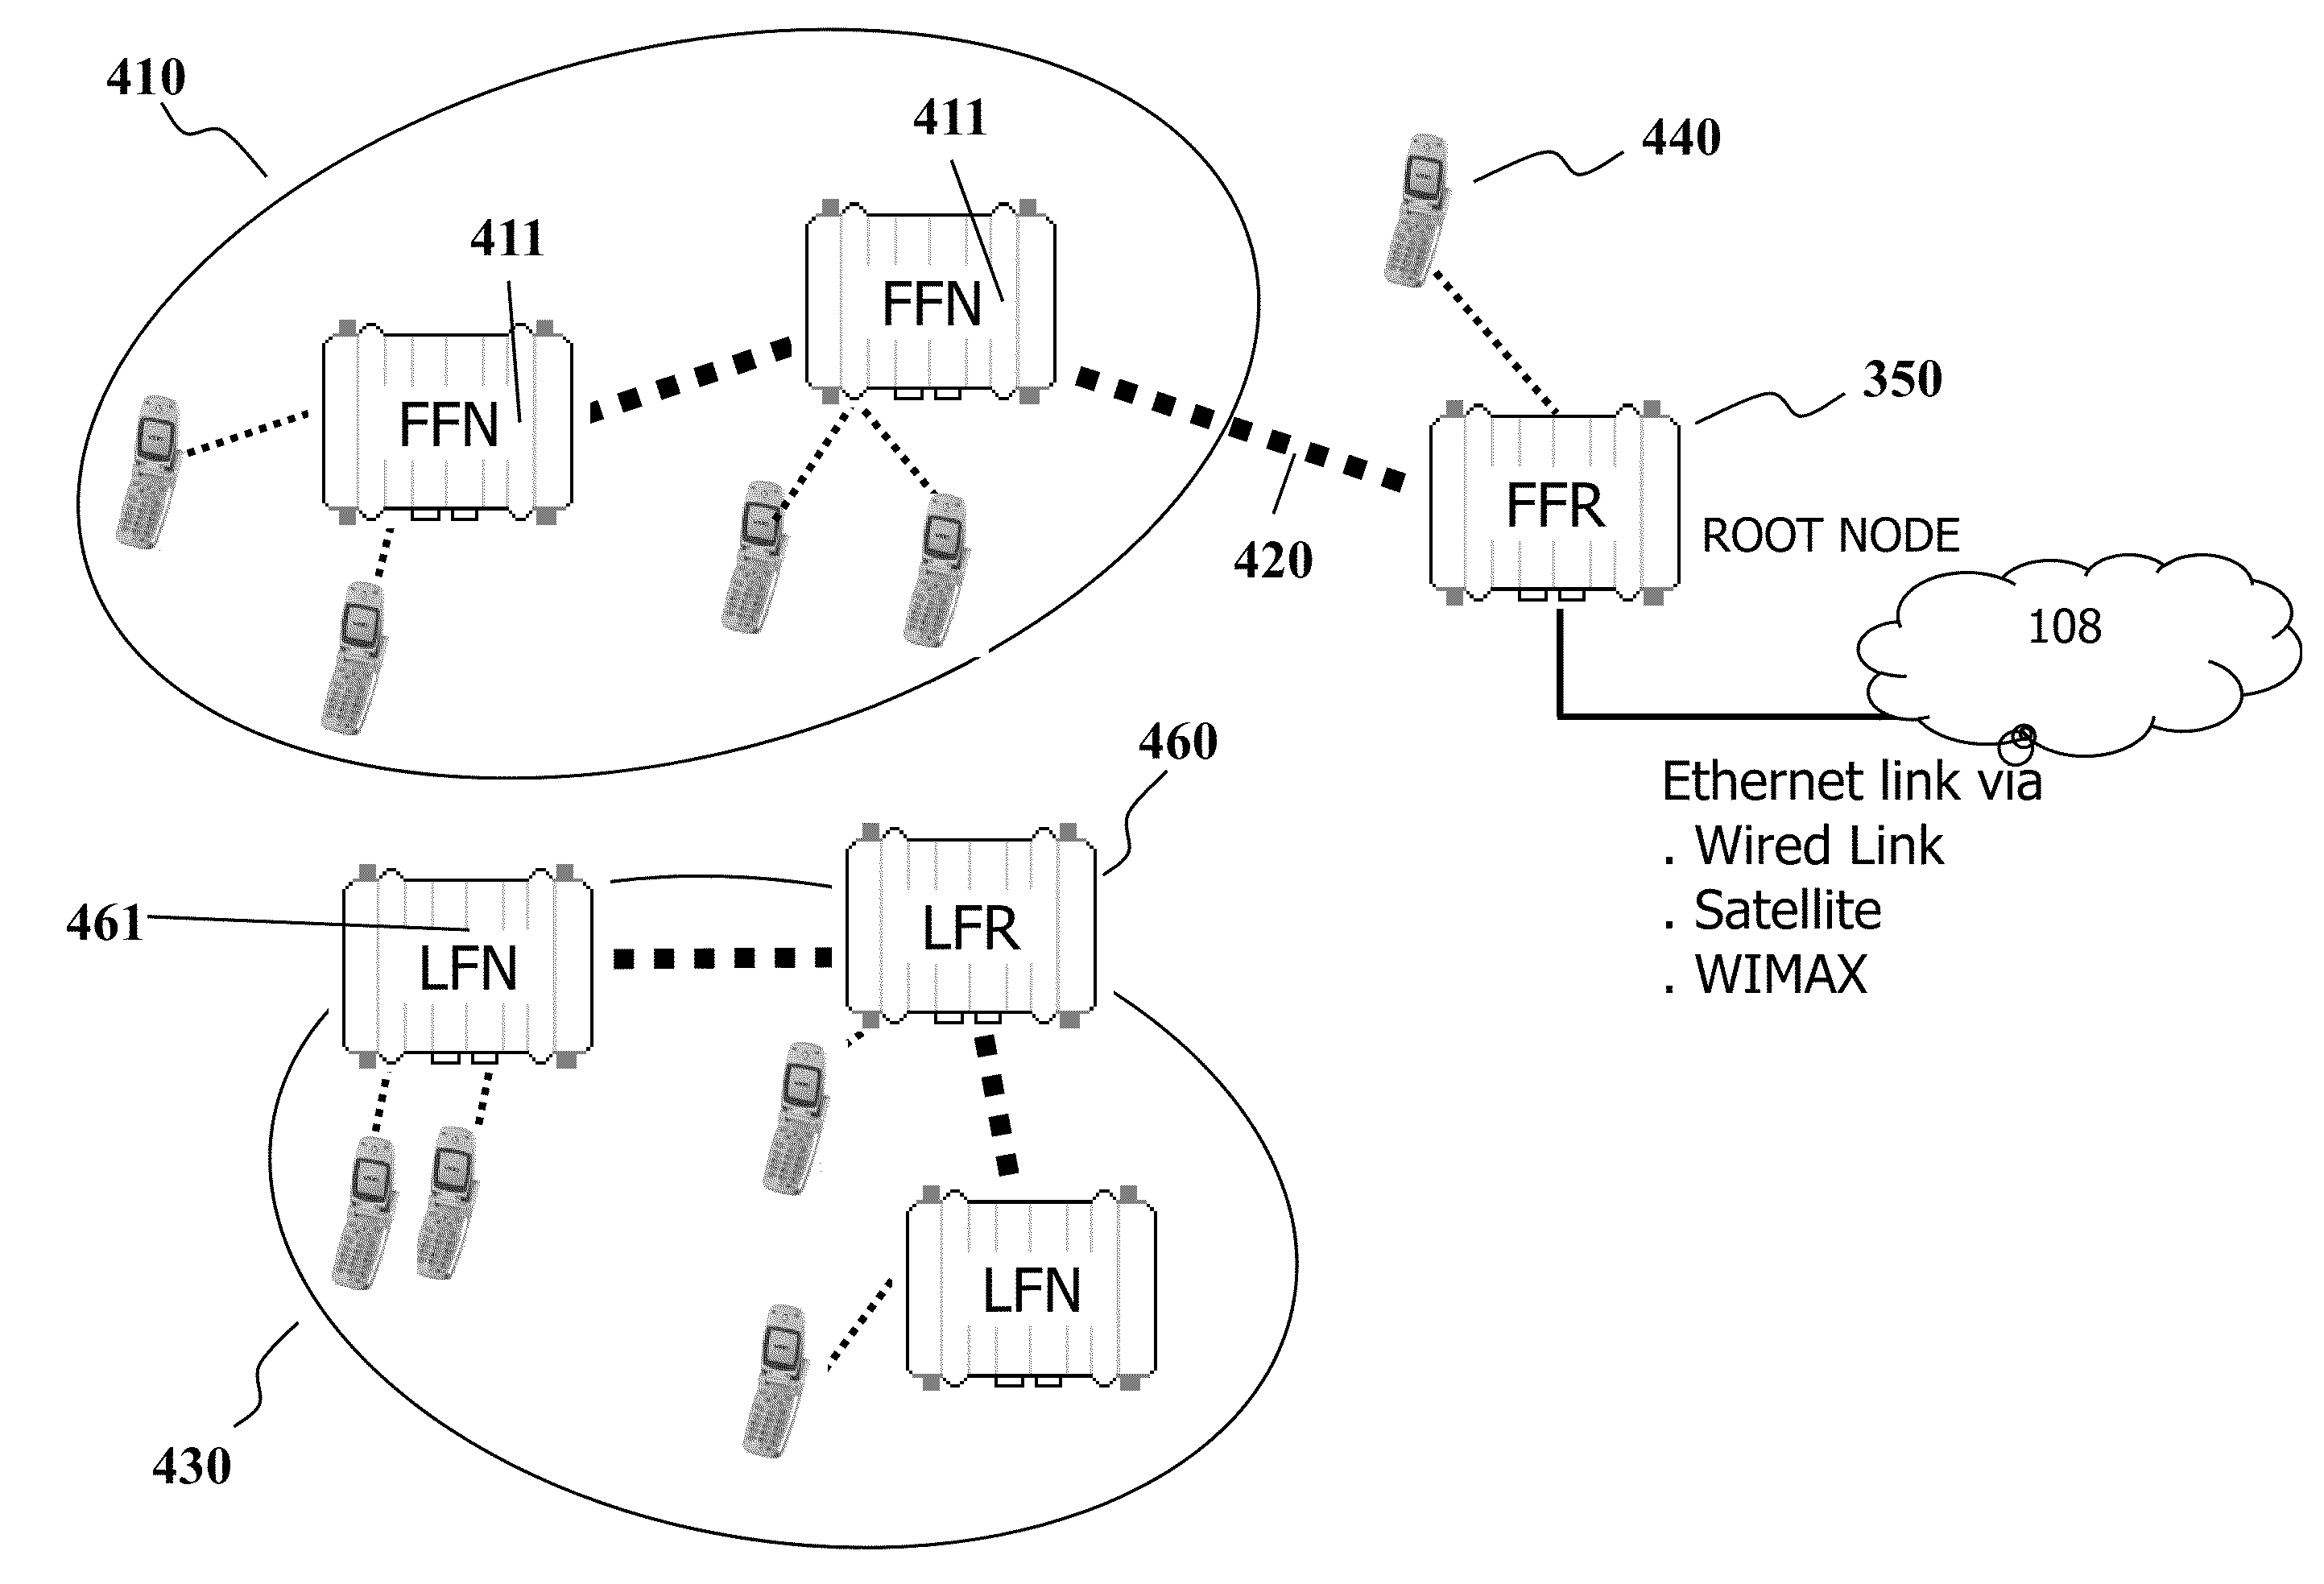 Persistent mesh for isolated mobile and temporal networking